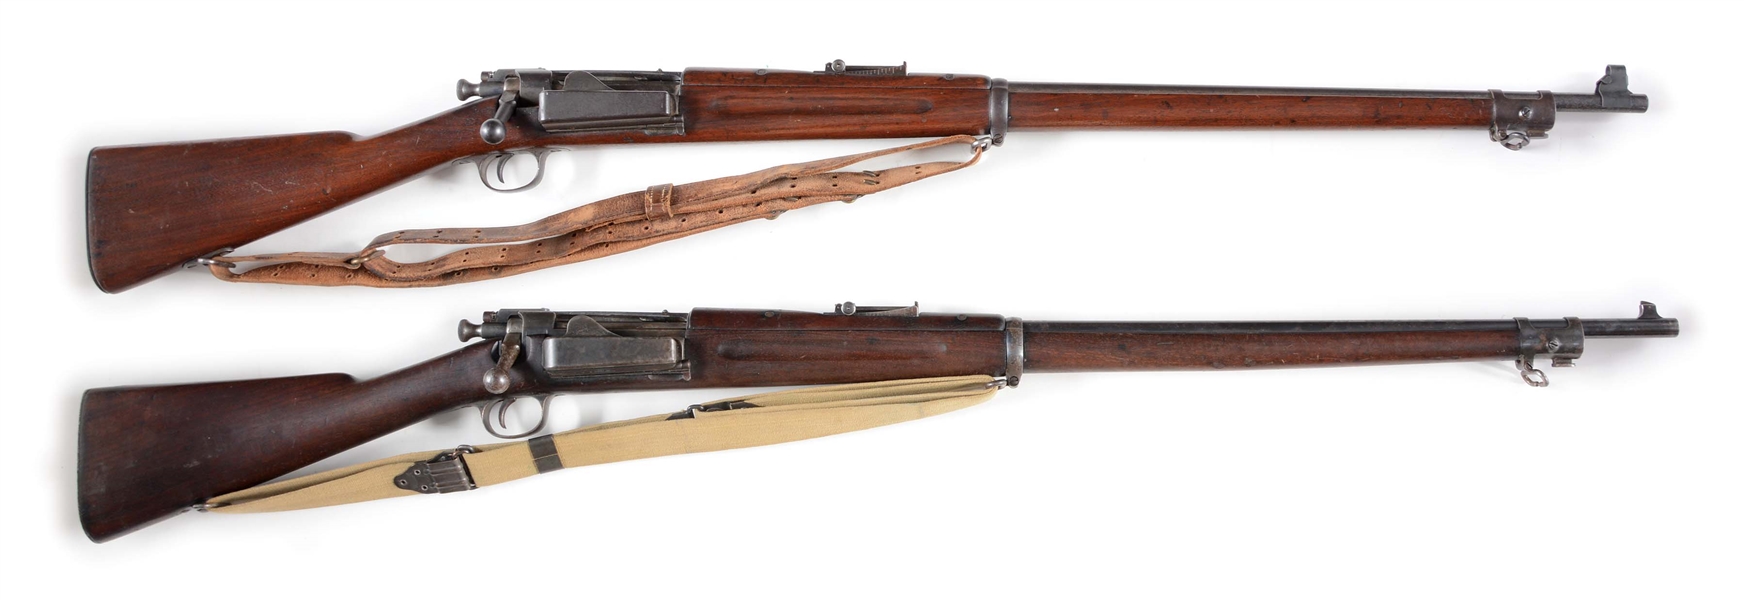 (C) LOT OF TWO: TWO US SPRINGFIELD KRAG MILITARY RIFLES